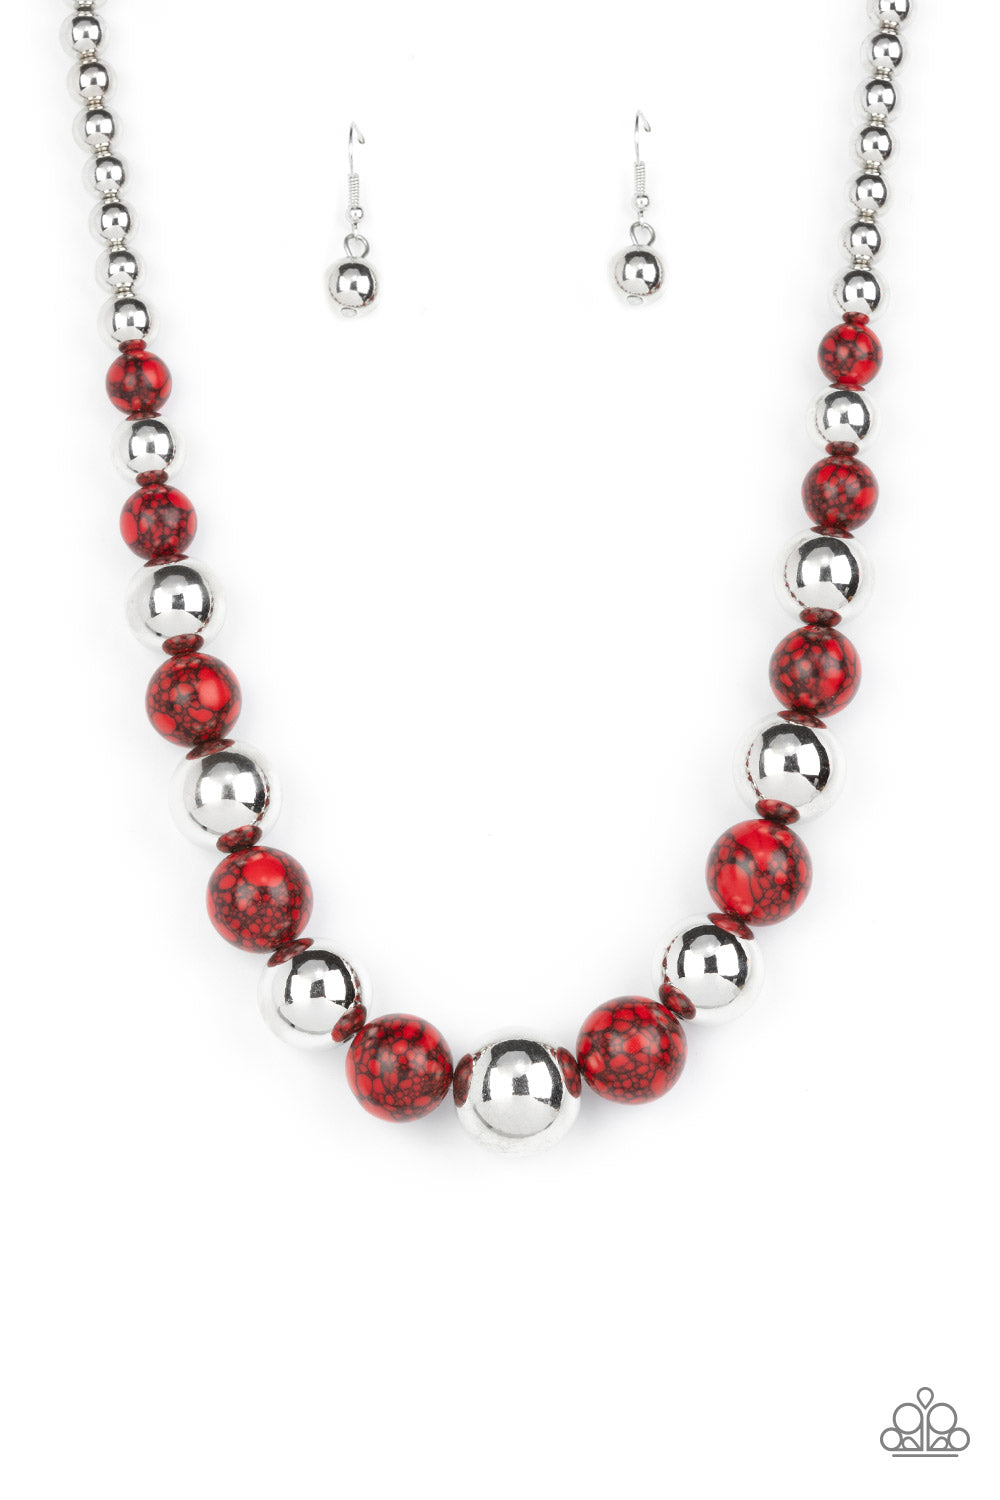 Stone Age Adventurer Red Necklace - Paparazzi Accessories  Featuring a red and black marble finish, a fiery collection of faux stone and classic silver beads gradually increase in size as they alternate below the collar for a statement-making look. Features an adjustable clasp closure.  Sold as one individual necklace. Includes one pair of matching earrings.